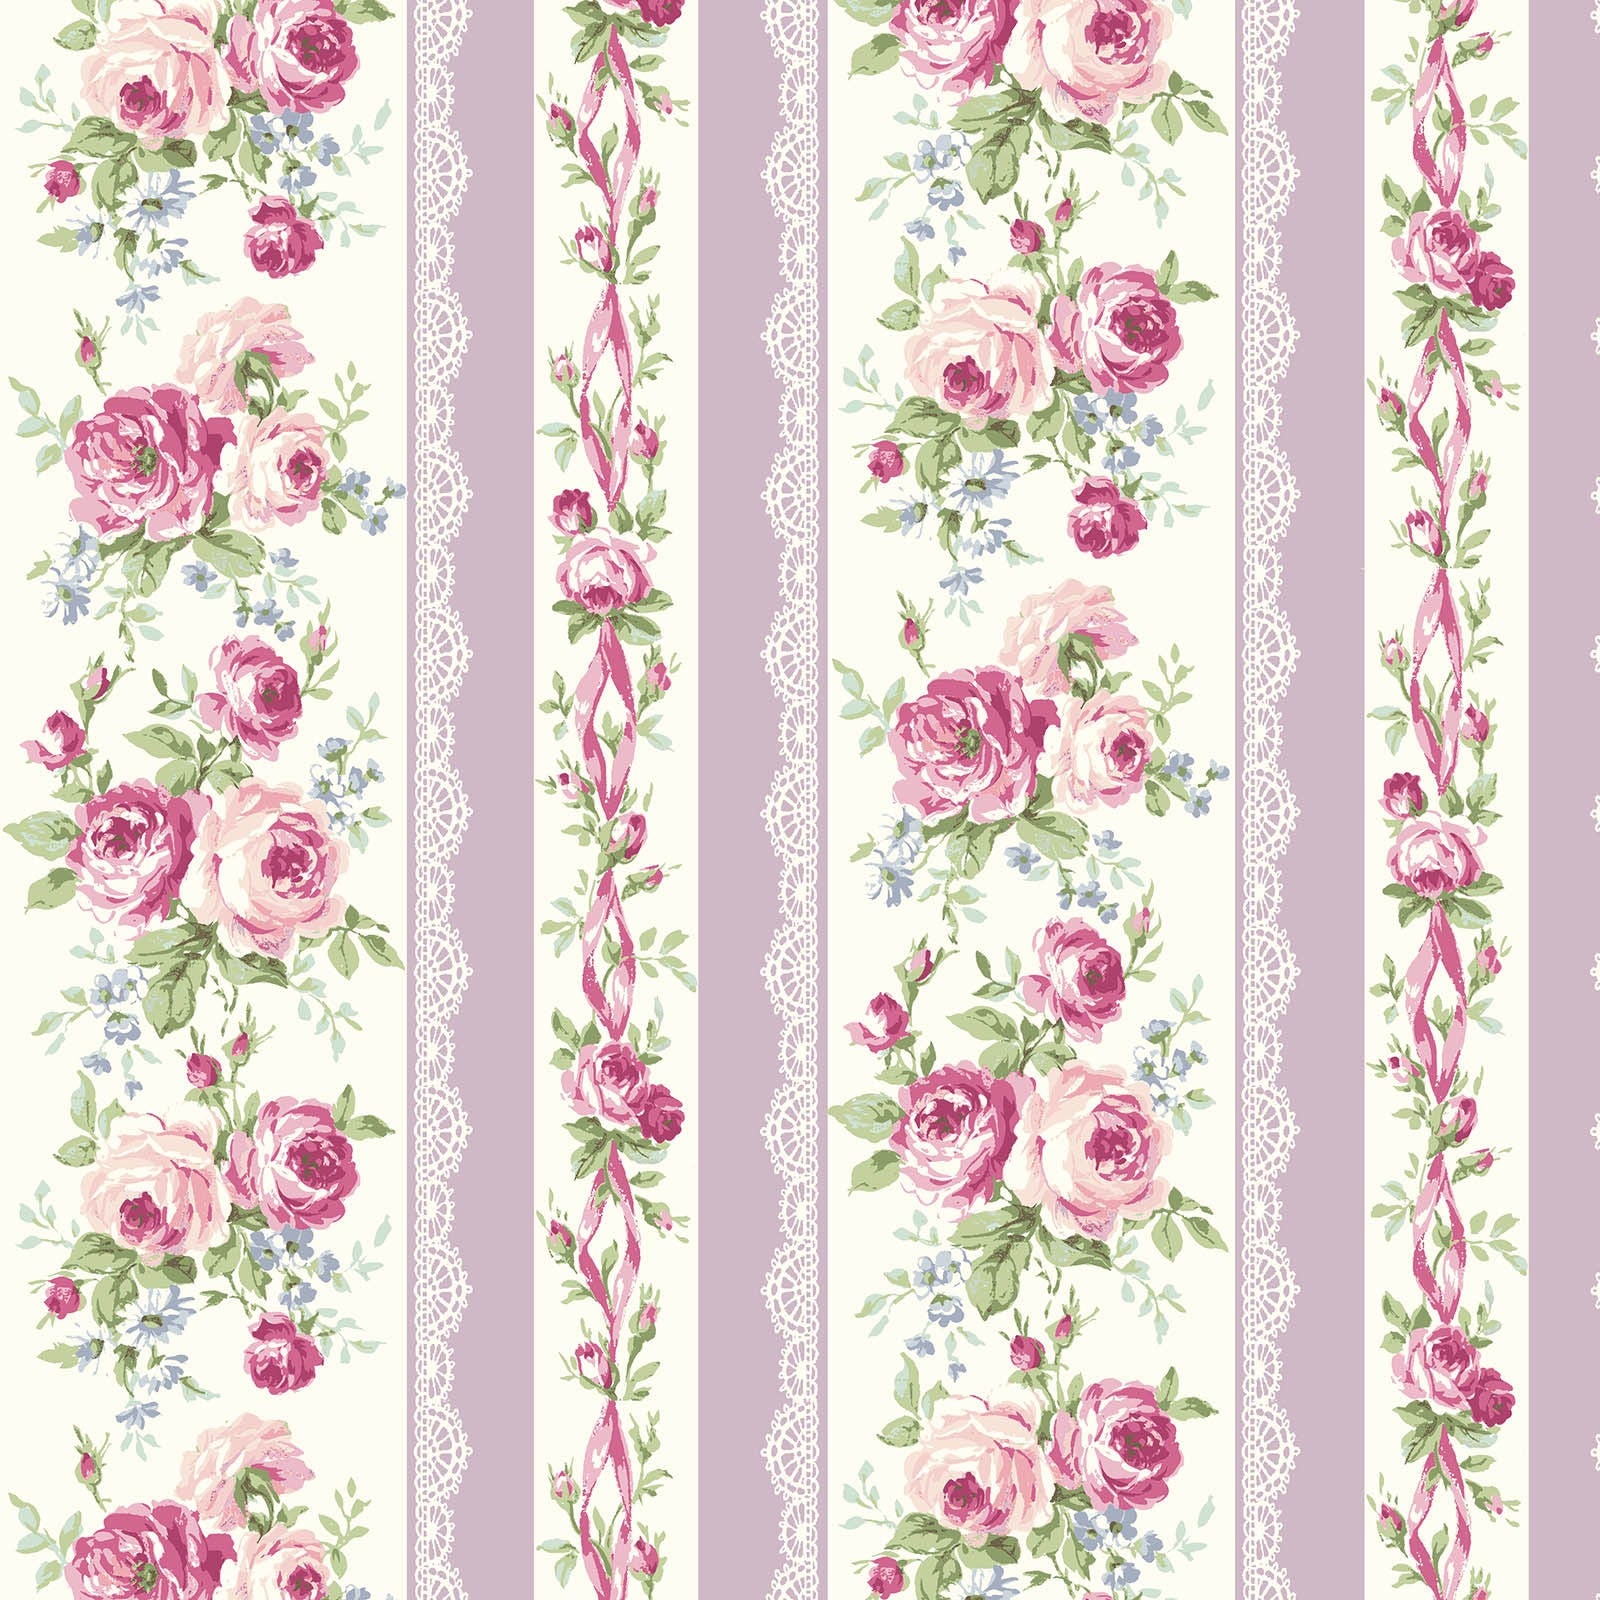 Rose Waltz RuRu Bouquet cotton fabric by Quilt Gate Ru2450-12E Roses and Ribbons on Purple